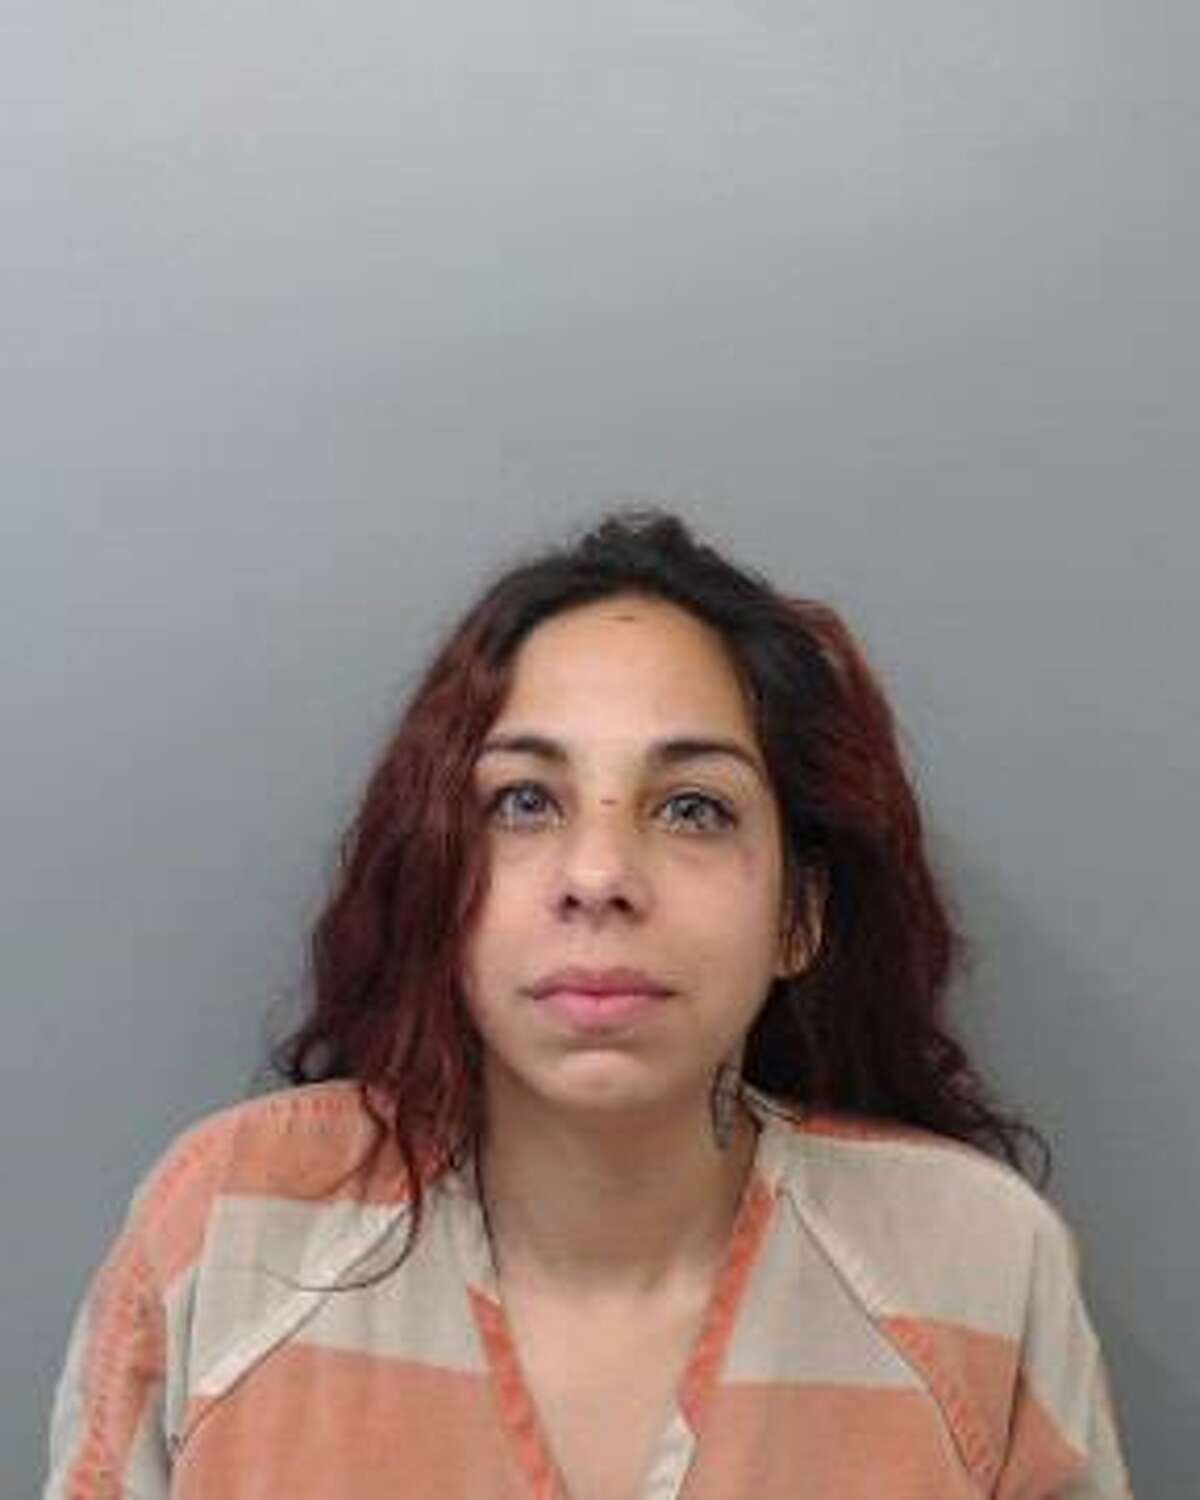 Rebecca Deeana Guerra, 36, was charged with fail to identify a fugitive with intent to give false information.